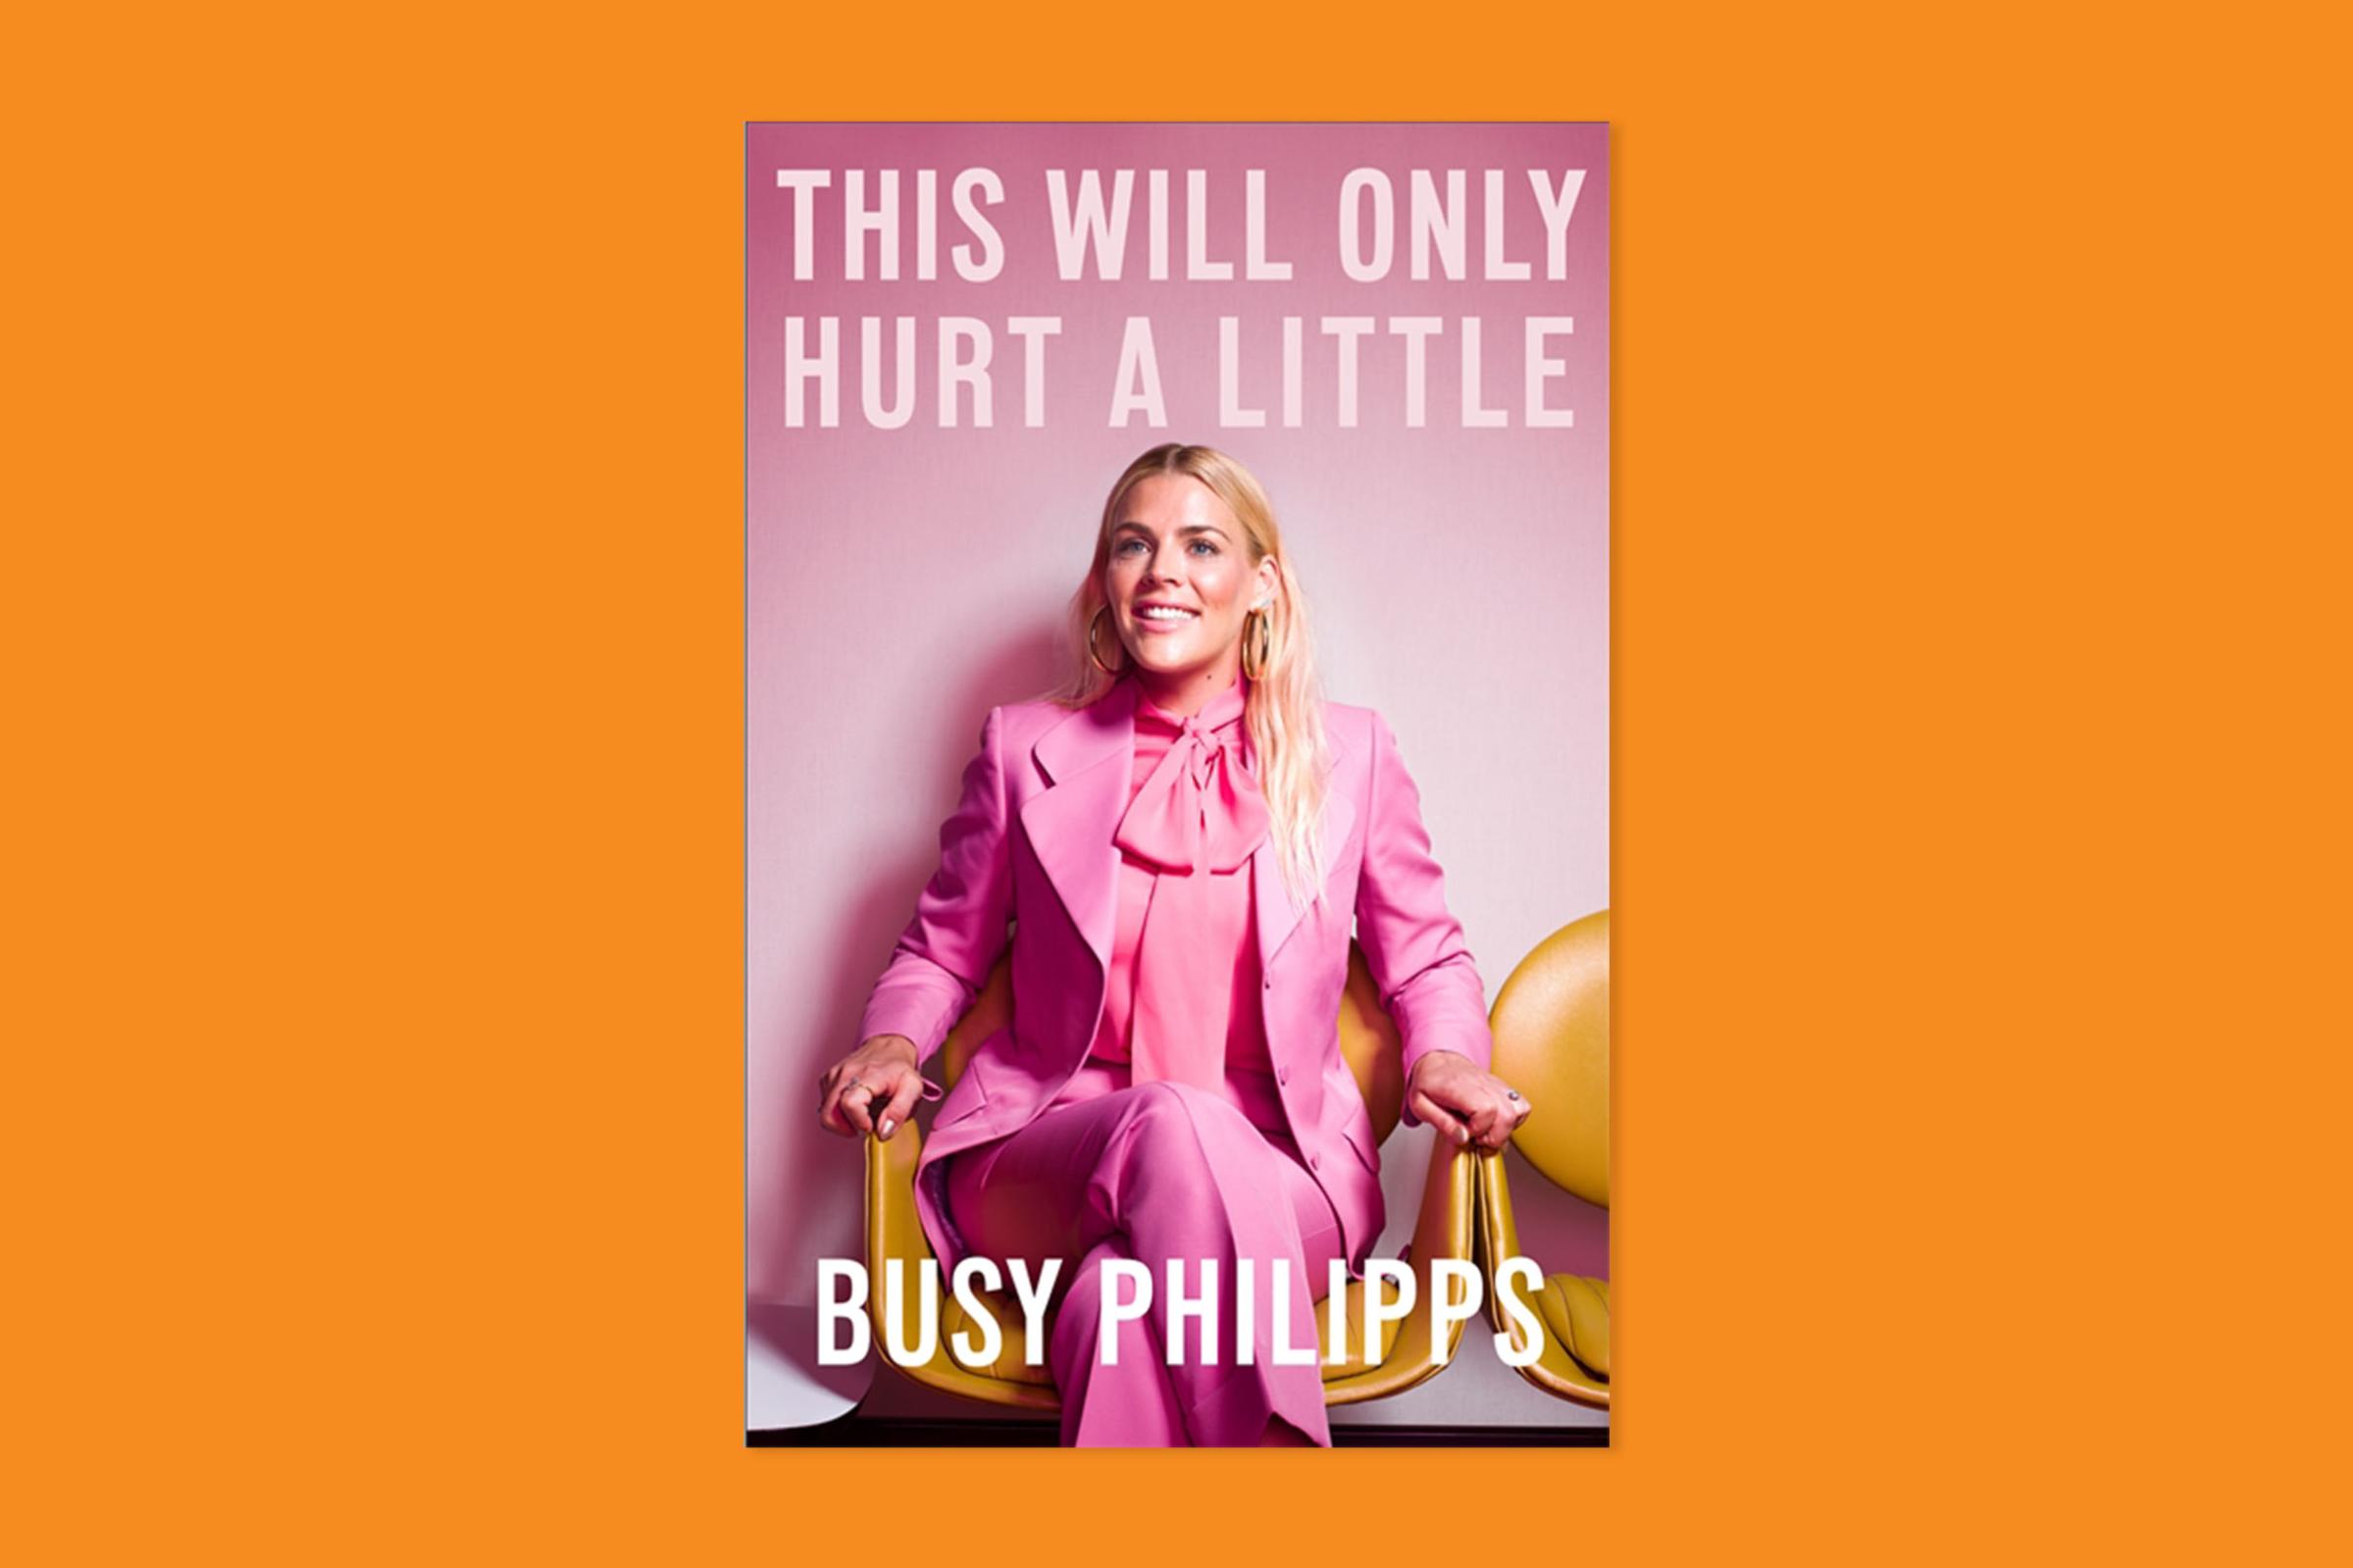 This Will Only Hurt a Little by Busy Philipps